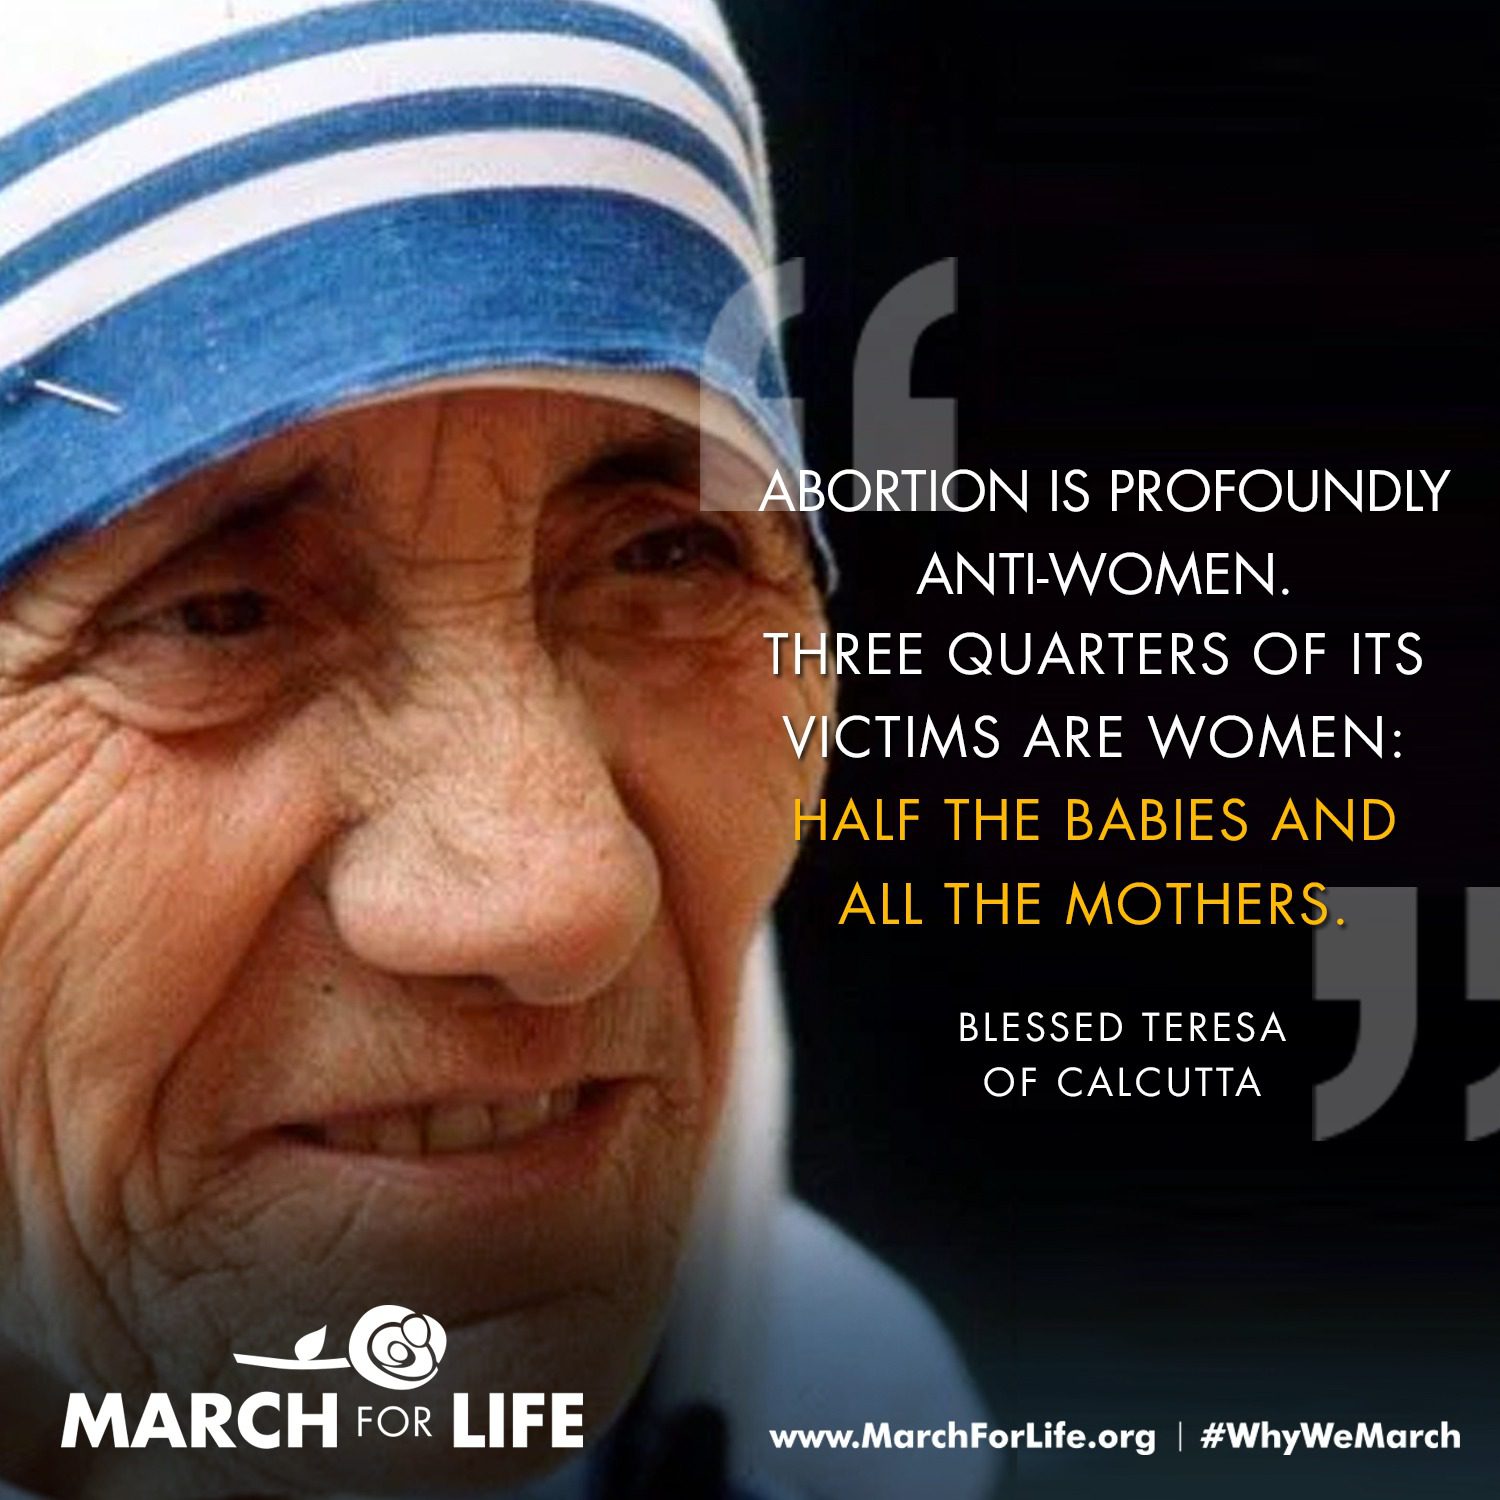 mother teresa quotes on abortion